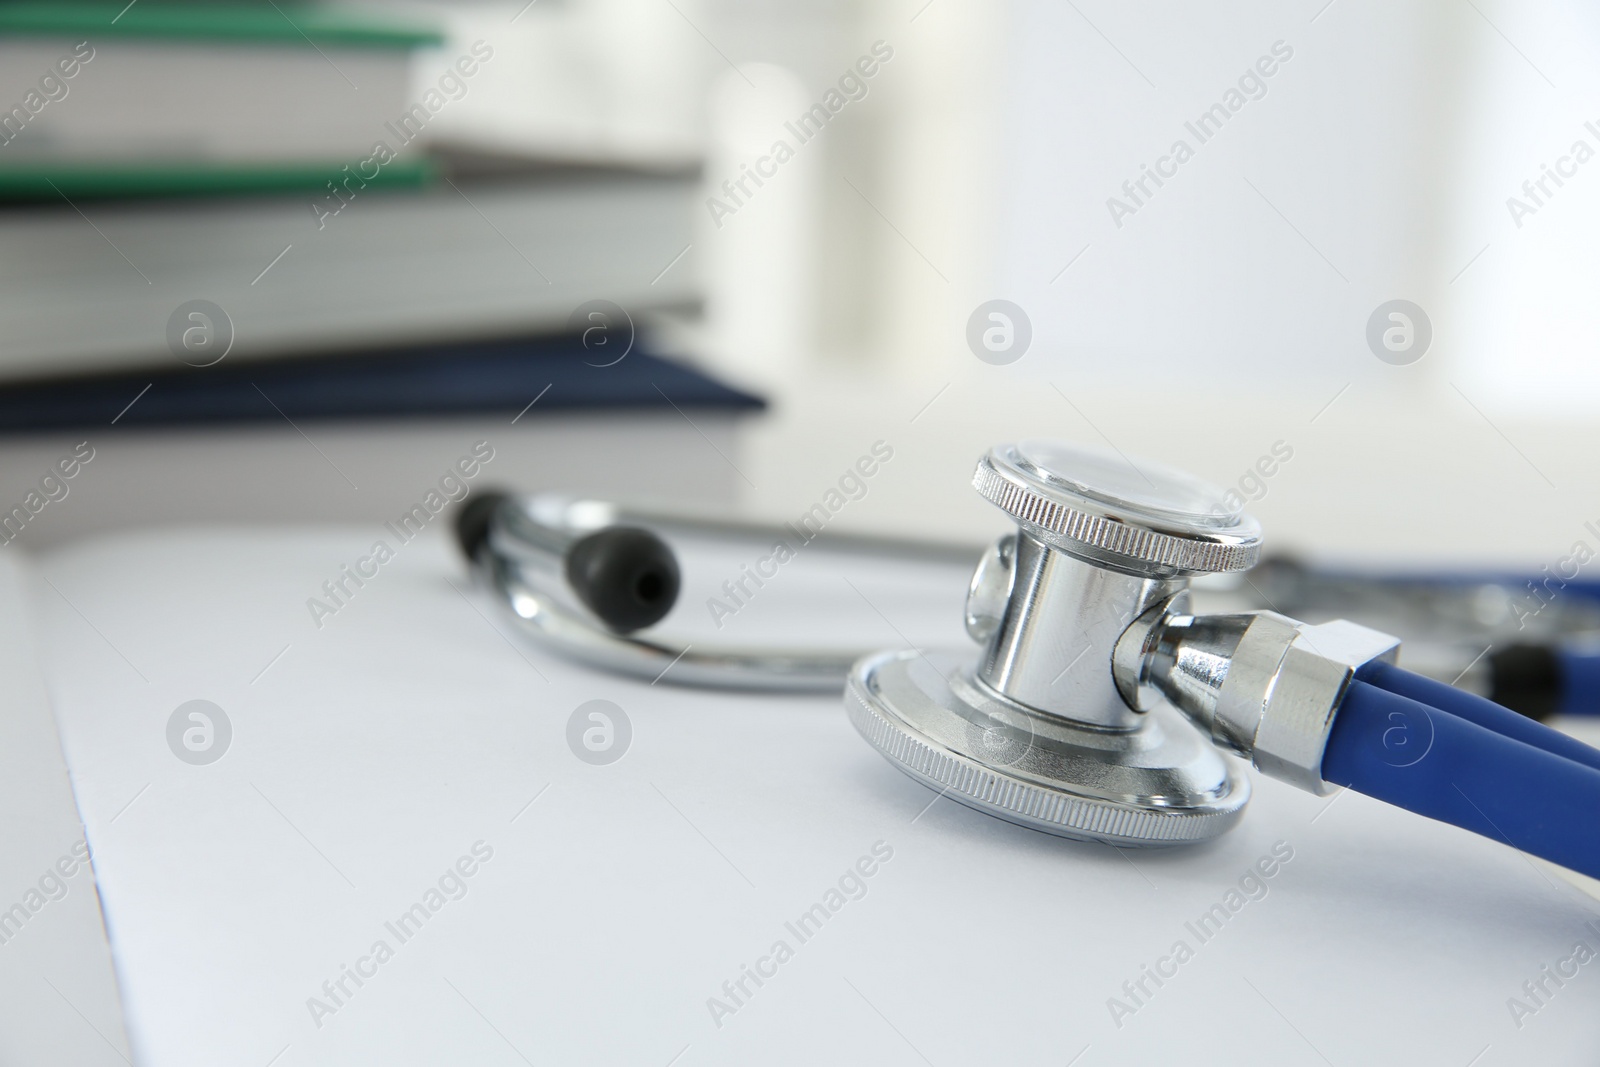 Photo of One new medical stethoscope and books on white table, closeup